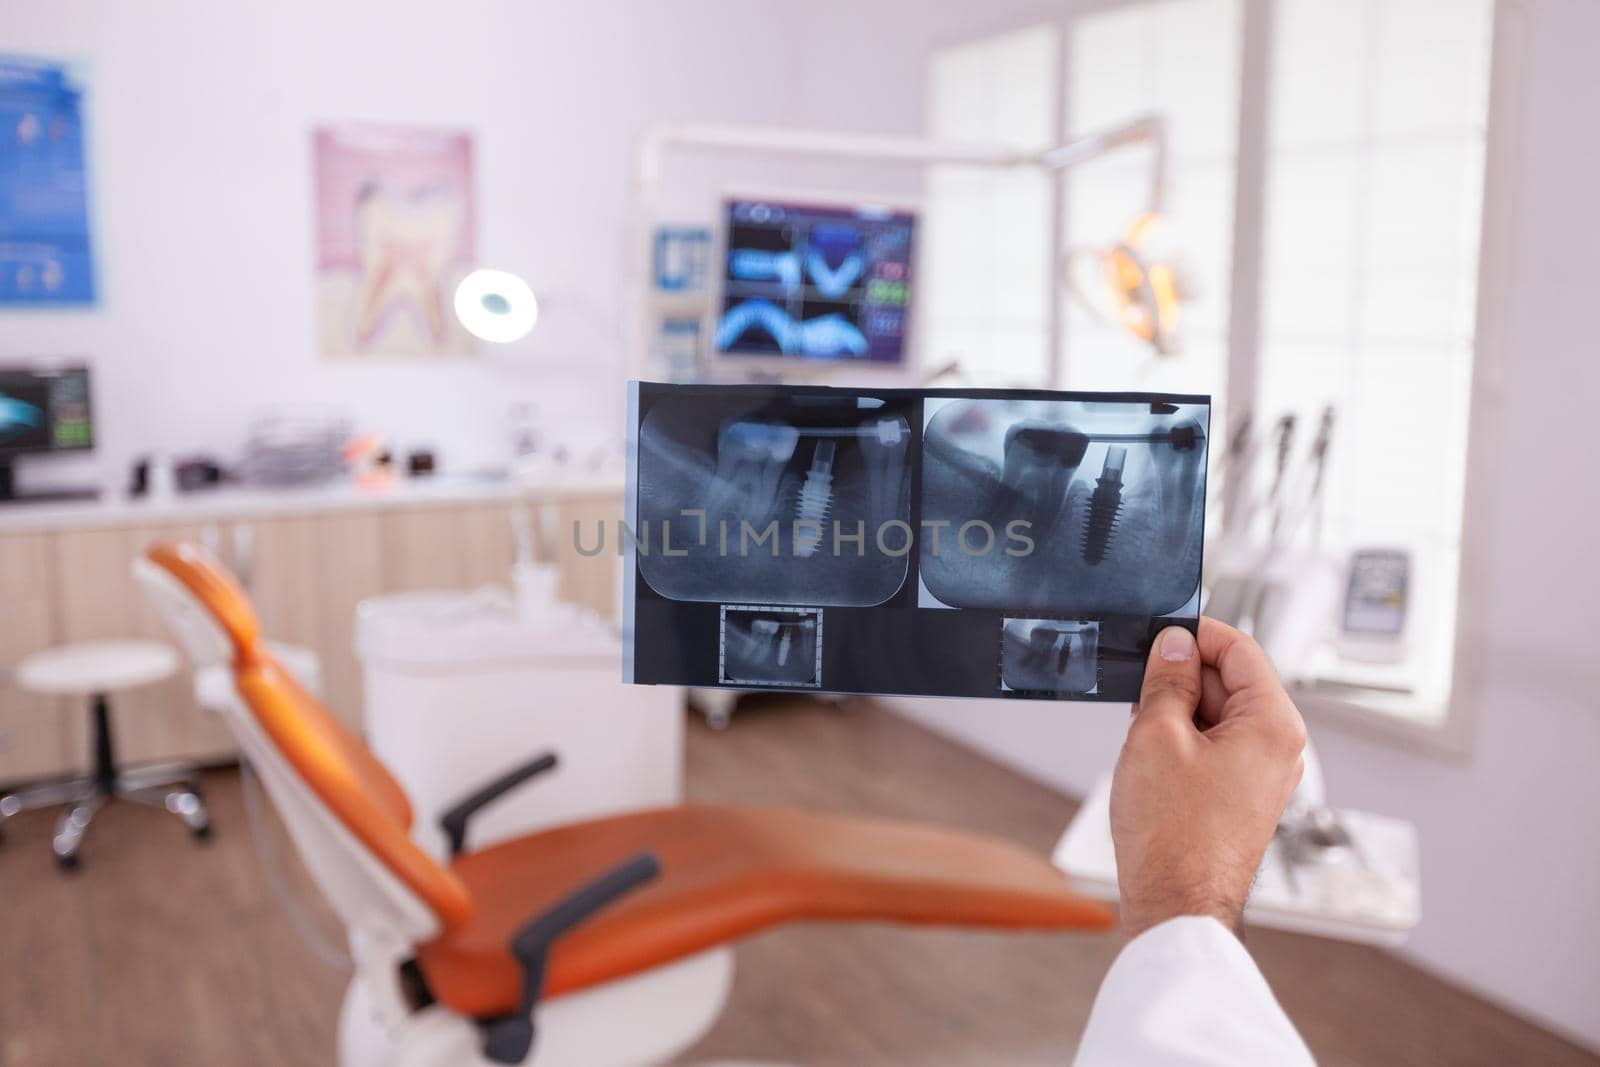 Orthodontist radiologist doctor holding teeth jaw surgery radiography by DCStudio